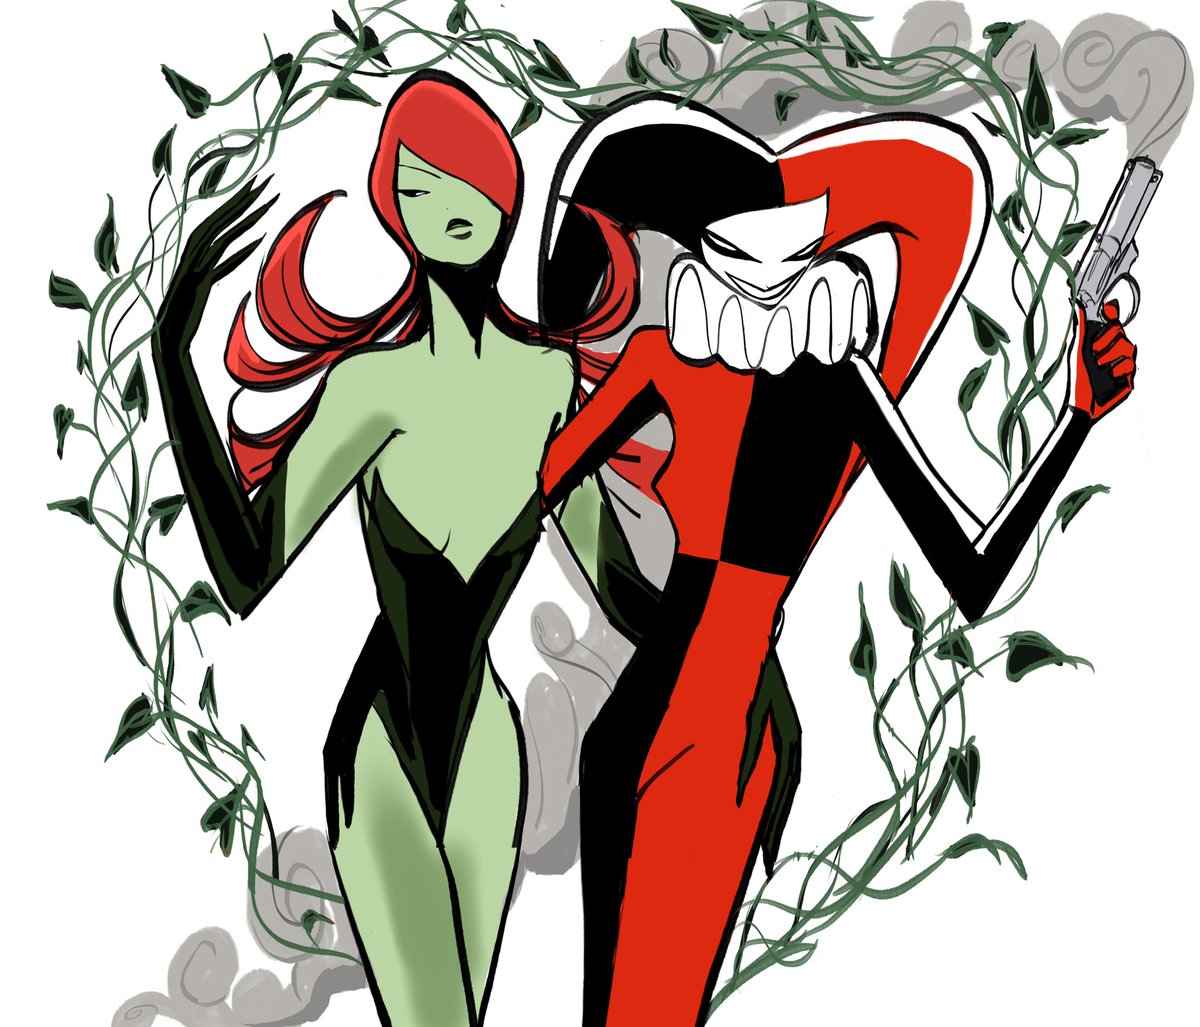 More Harley Quinn and Poison Ivy #harlivy